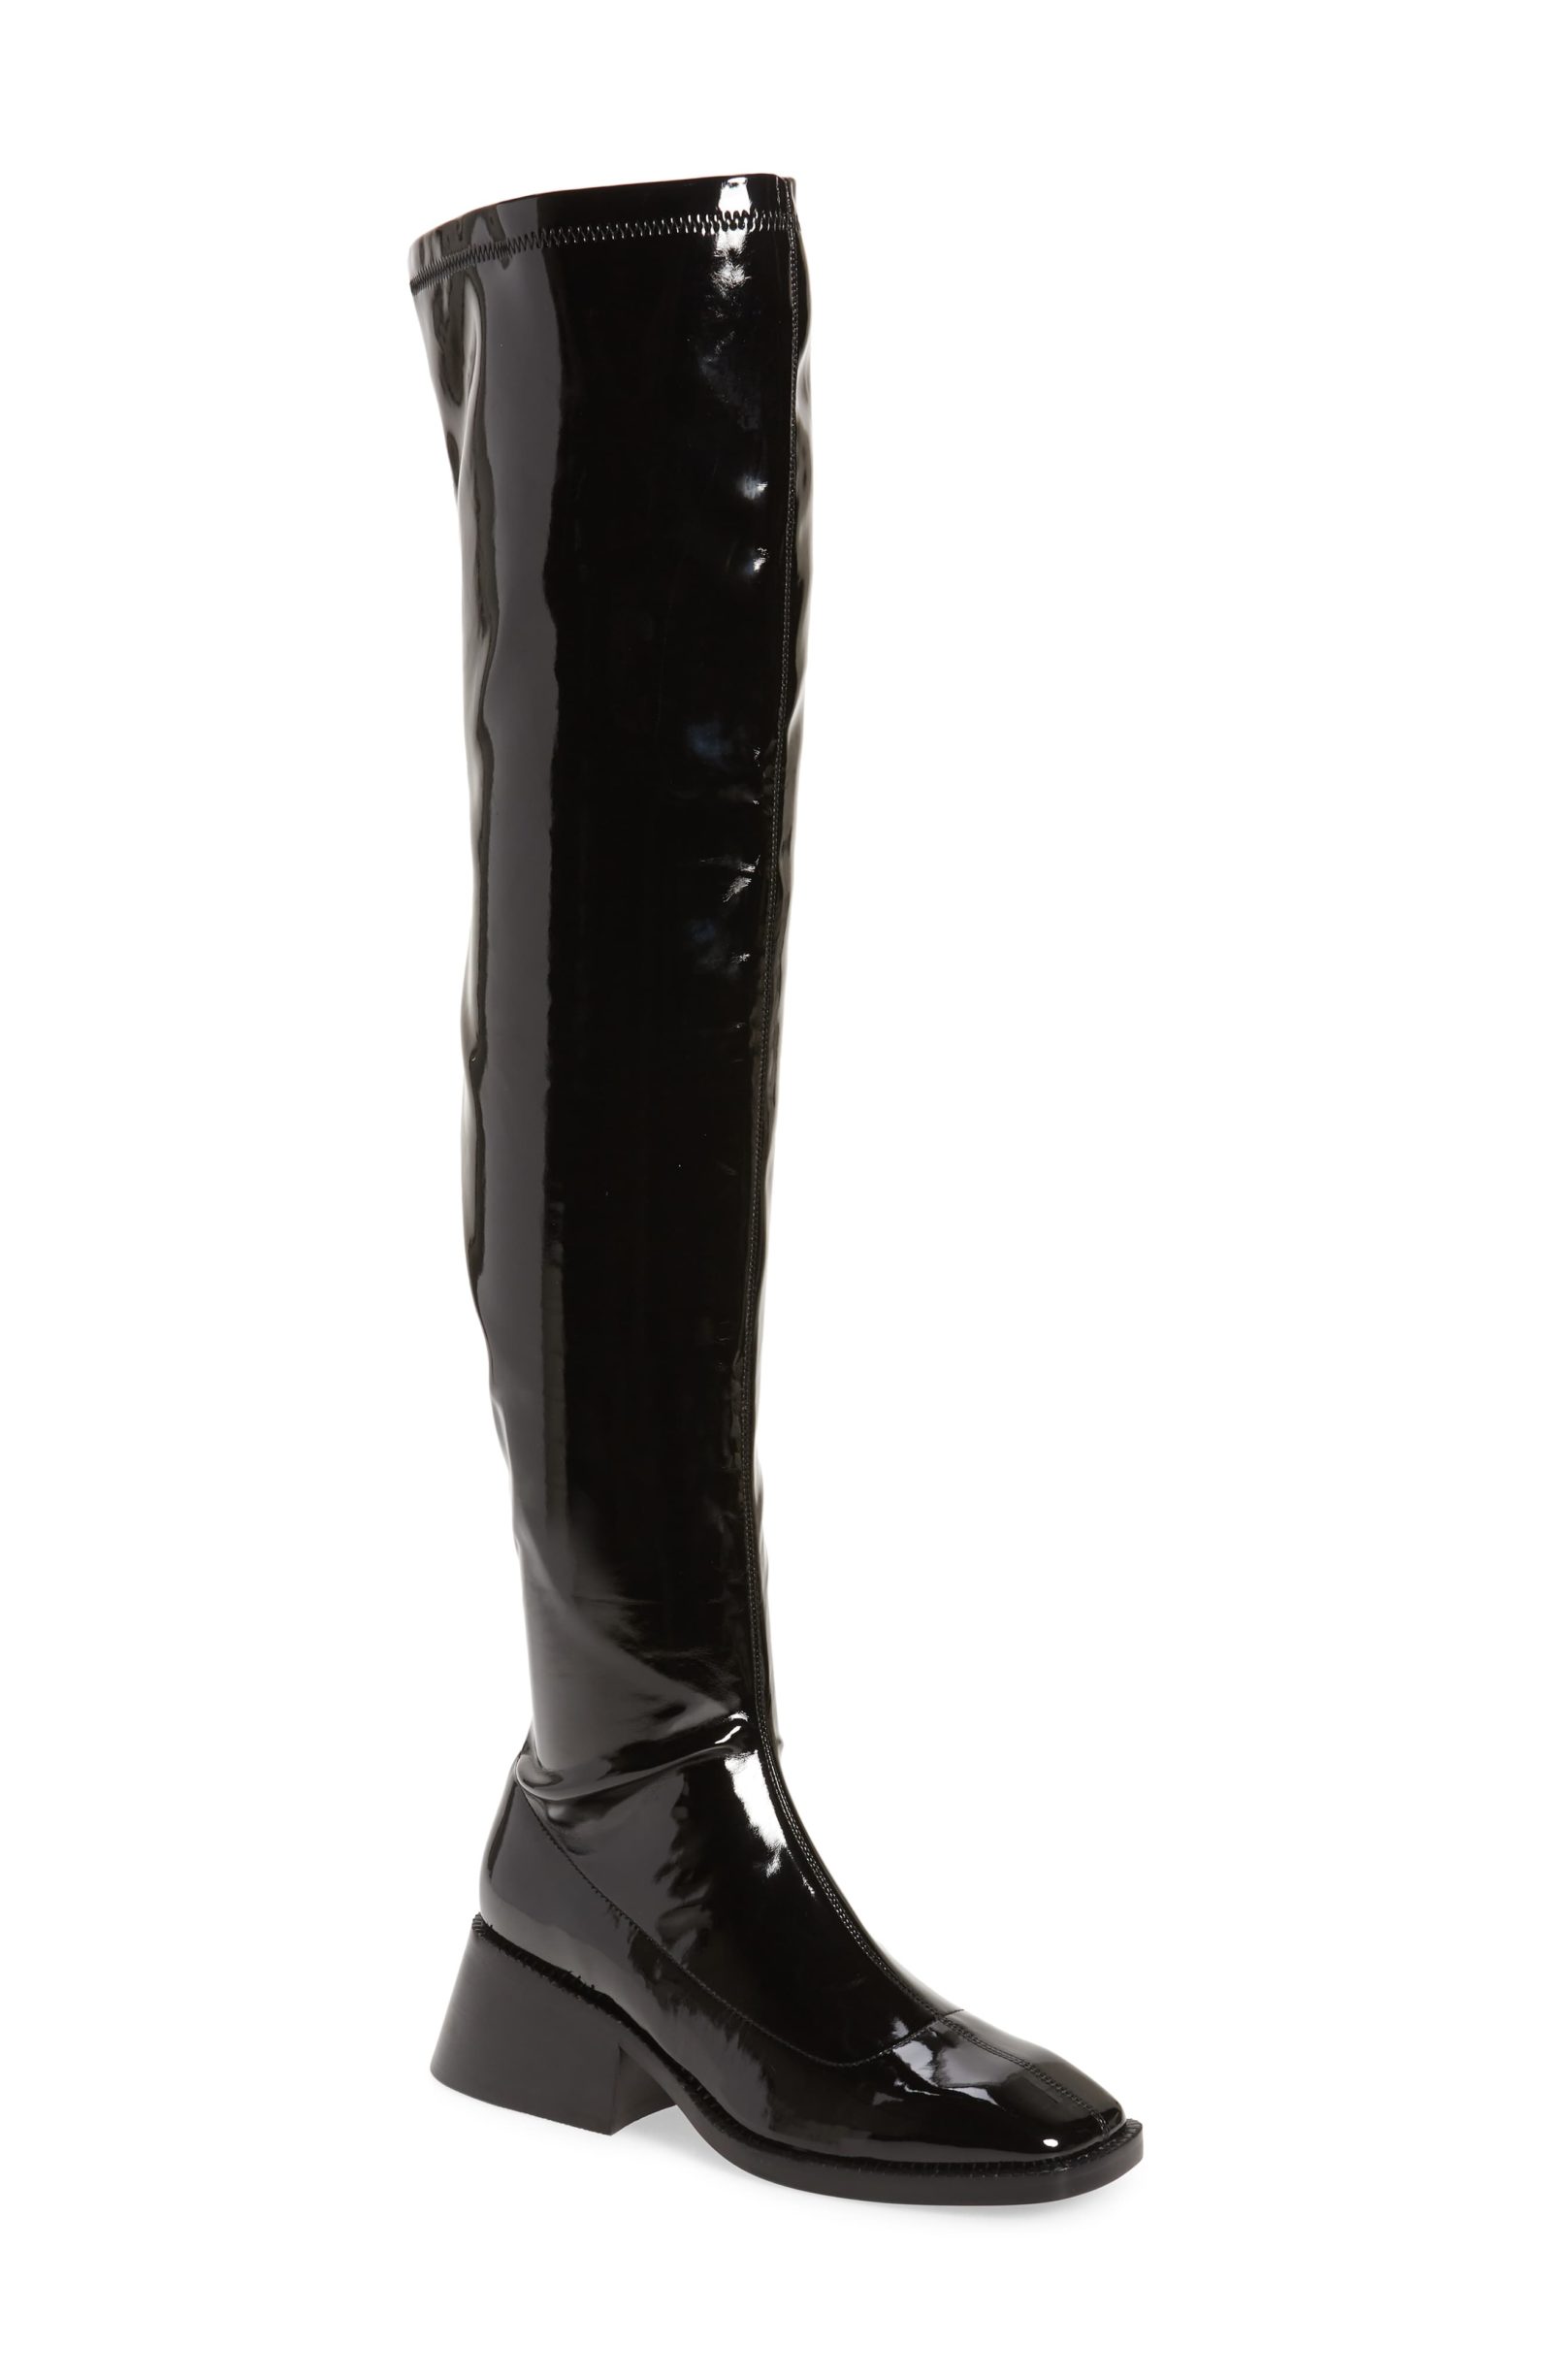 17 Jaw-Dropping Thigh High Boots For 2021 That We Cannot Resist